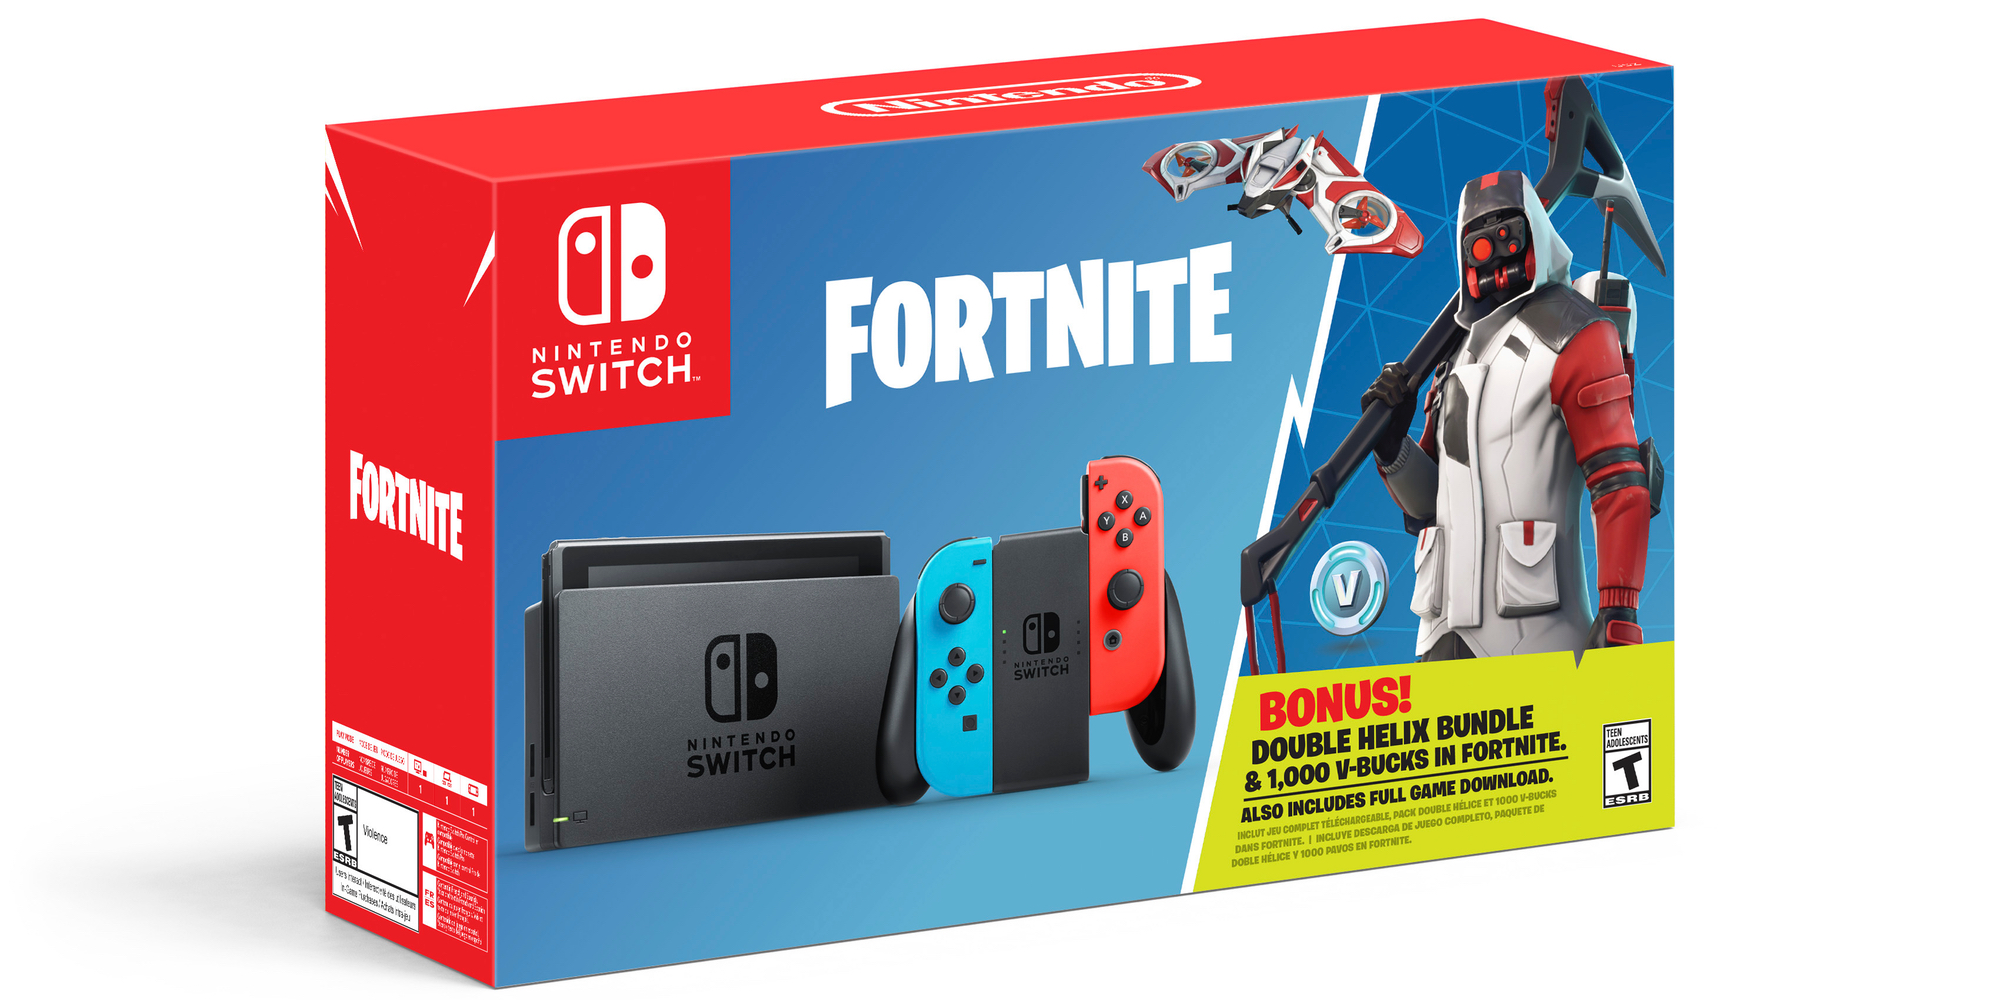 Nintendo announces Fornite Switch bundle complete with V ... - 2000 x 1000 jpeg 176kB